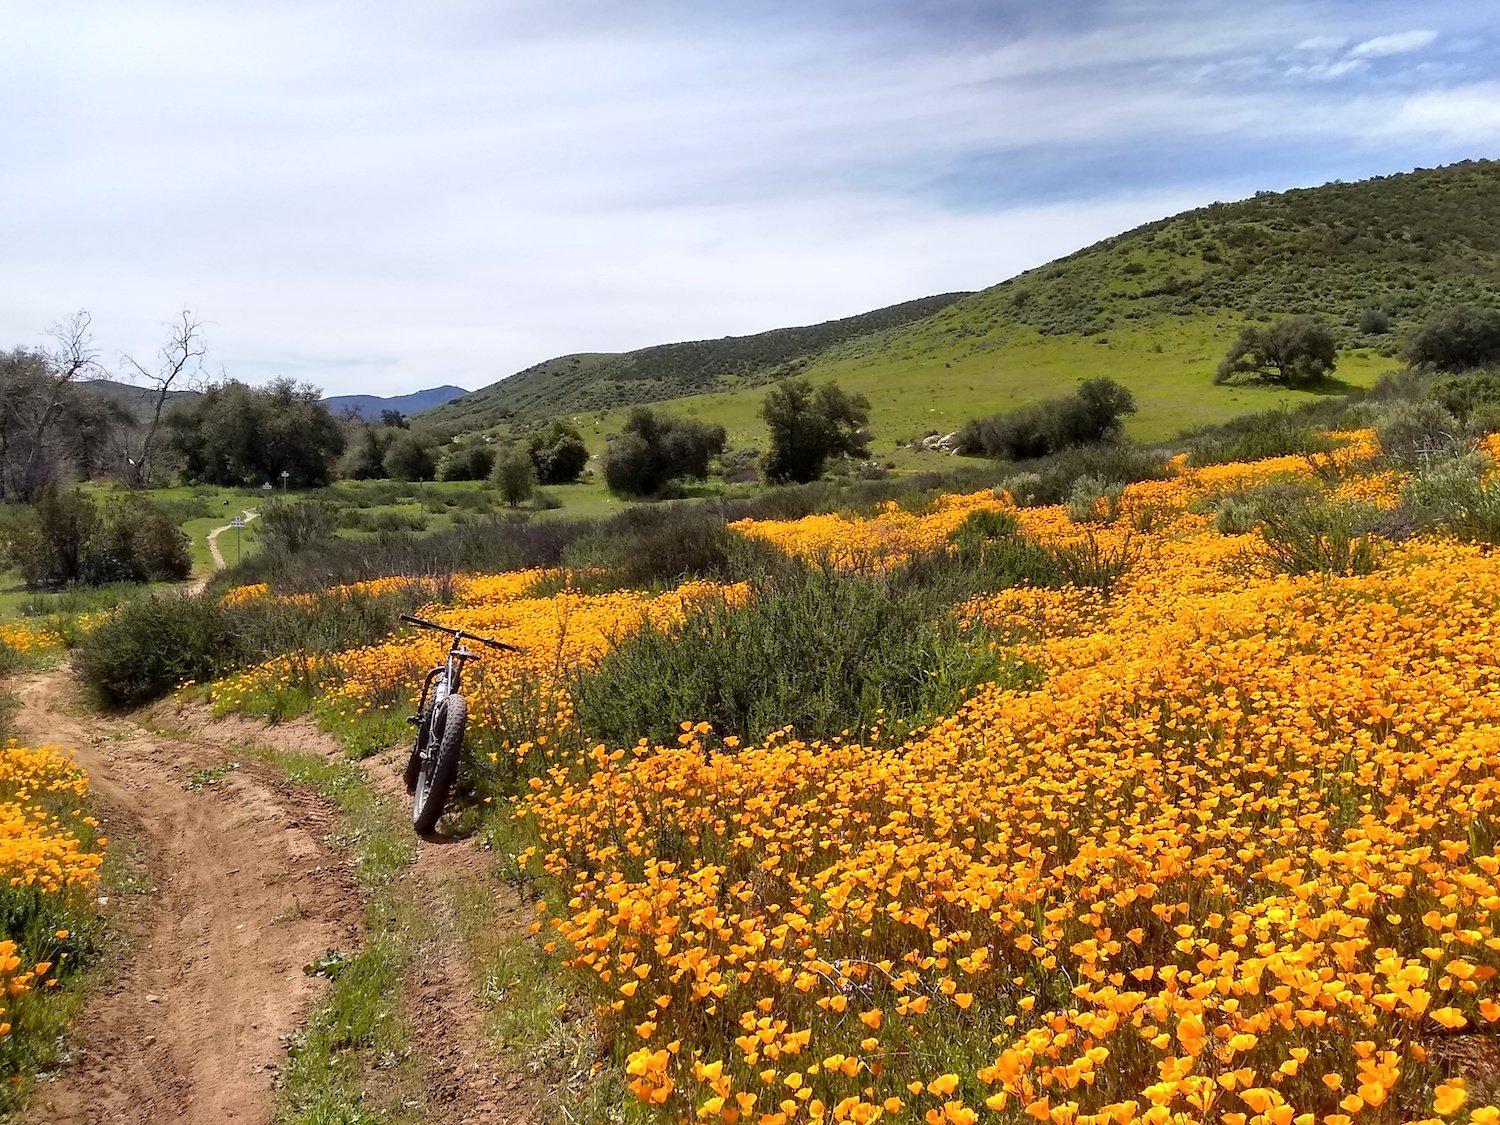 The Stowe Trail in Miramar, San Diego featuring a mountain bike on a trail with blooming wildflowers in the background